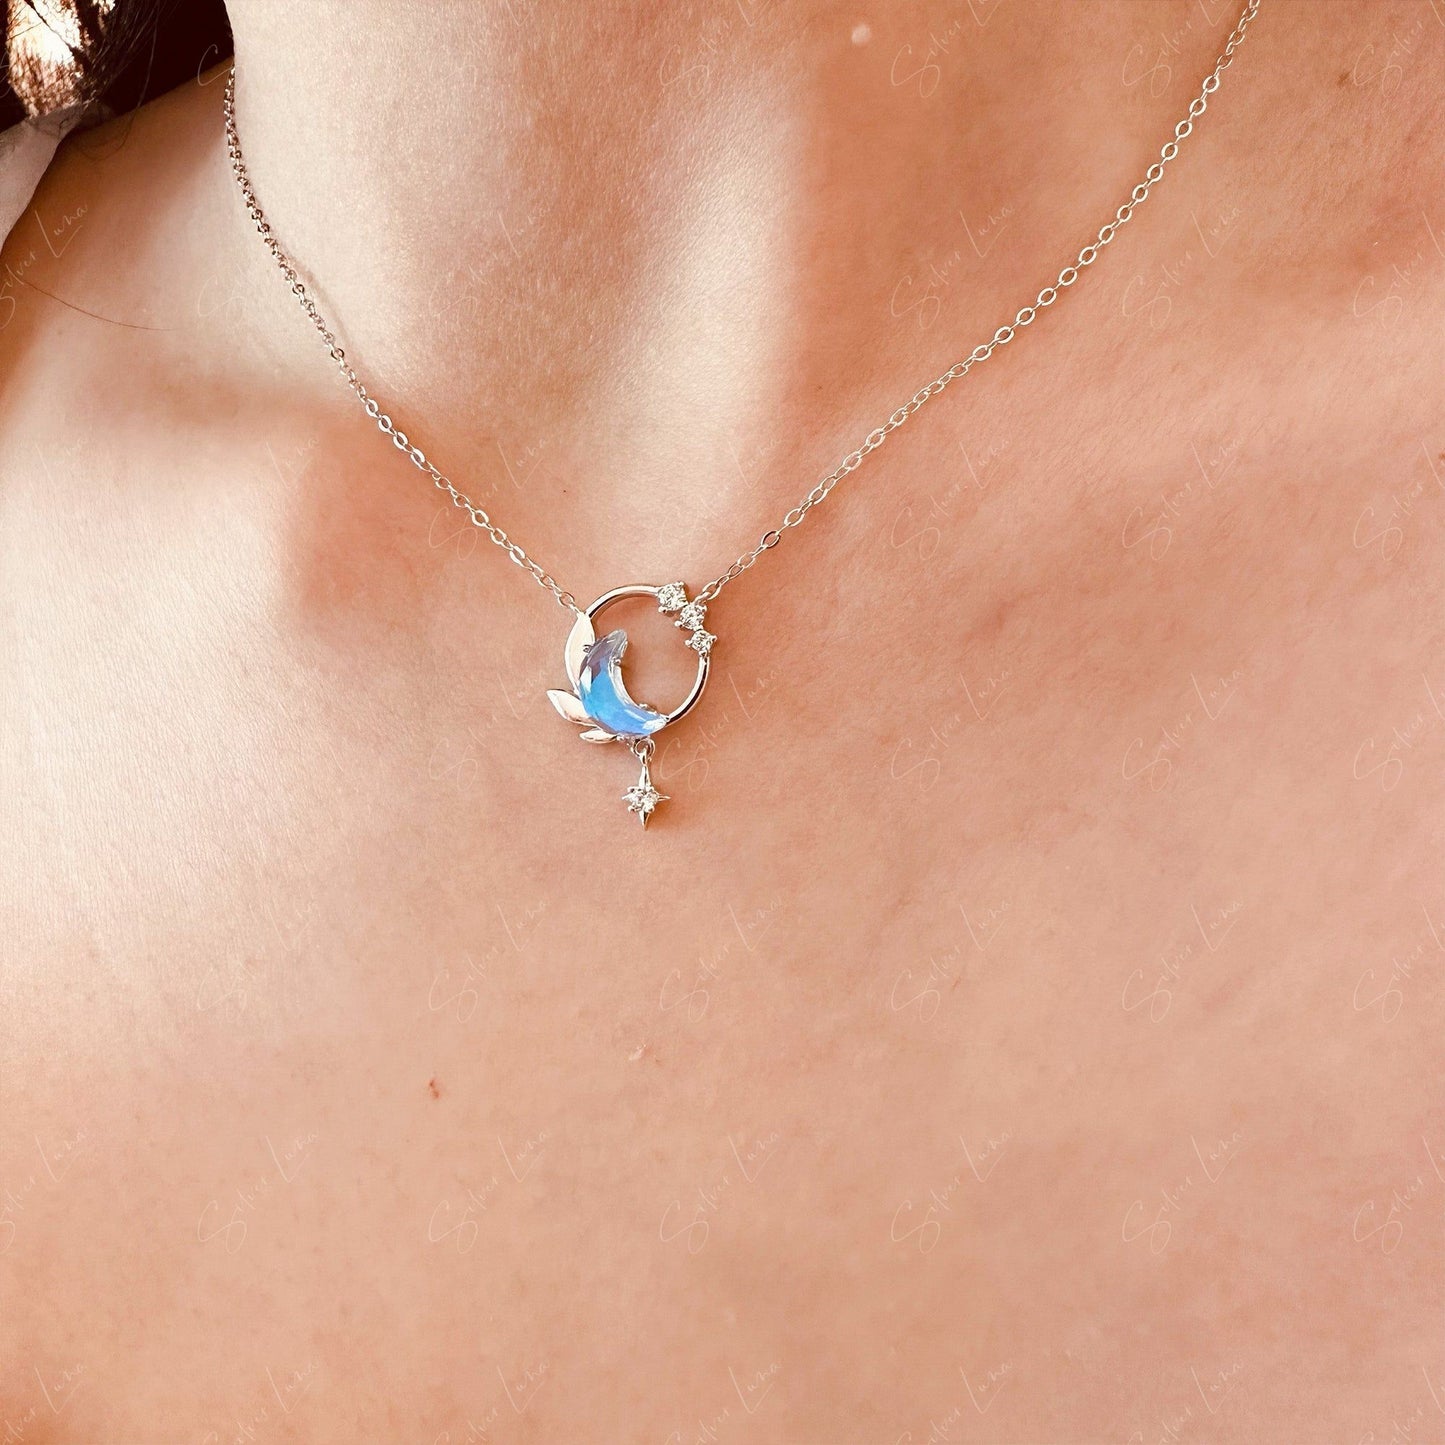 Crystal Moon Pendant Necklace